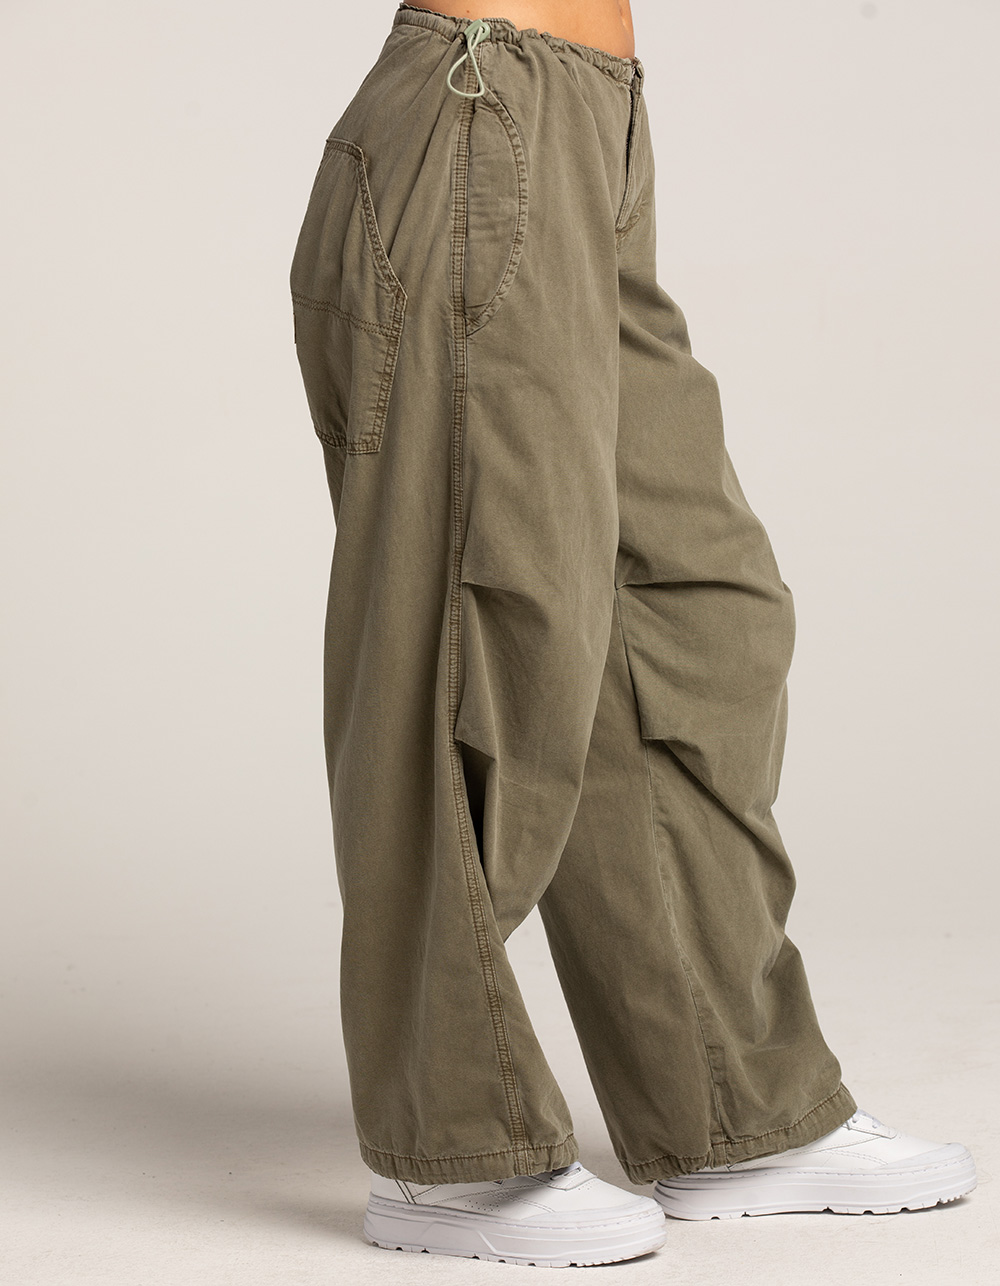 BDG Urban Outfitters Womens Cargo Puddle Pants - BLACK, Tillys